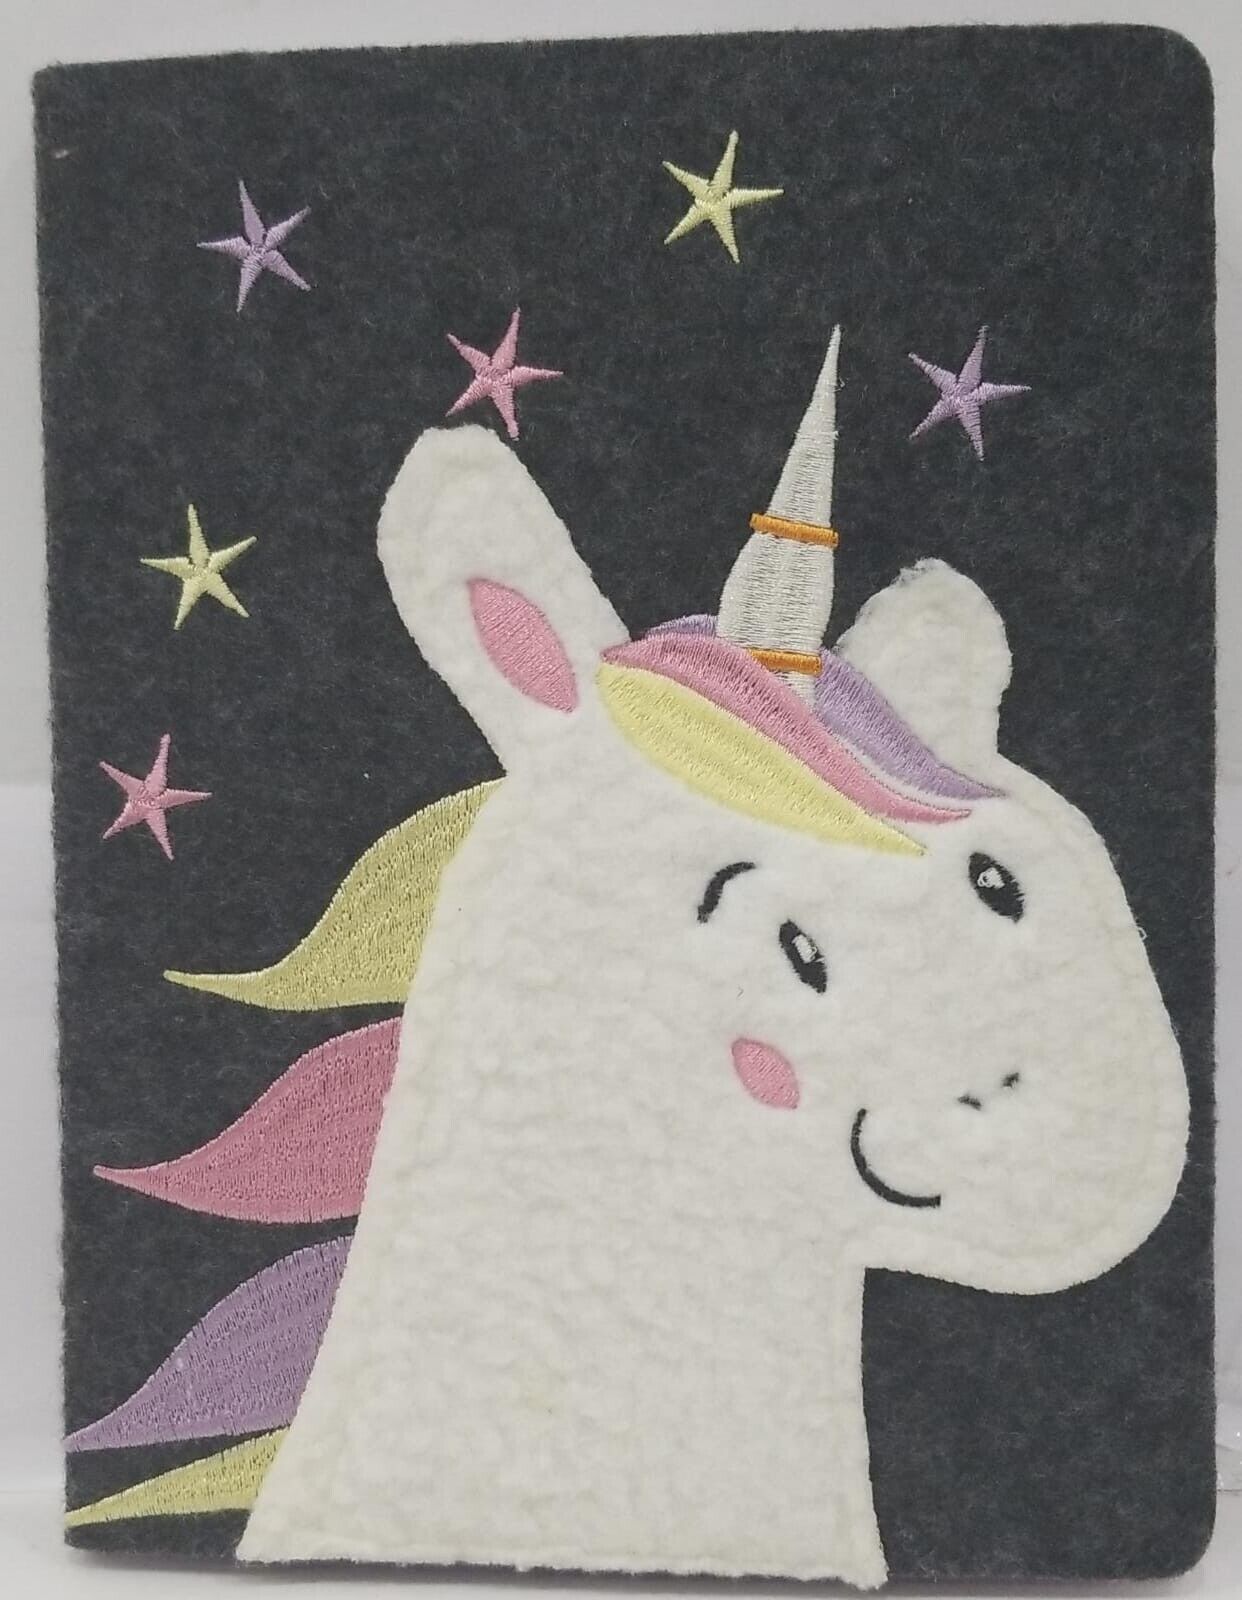 Primary image for Office Depot Felt Cover Unicorn Journal 96 Sheets With Ribbon Page Marker